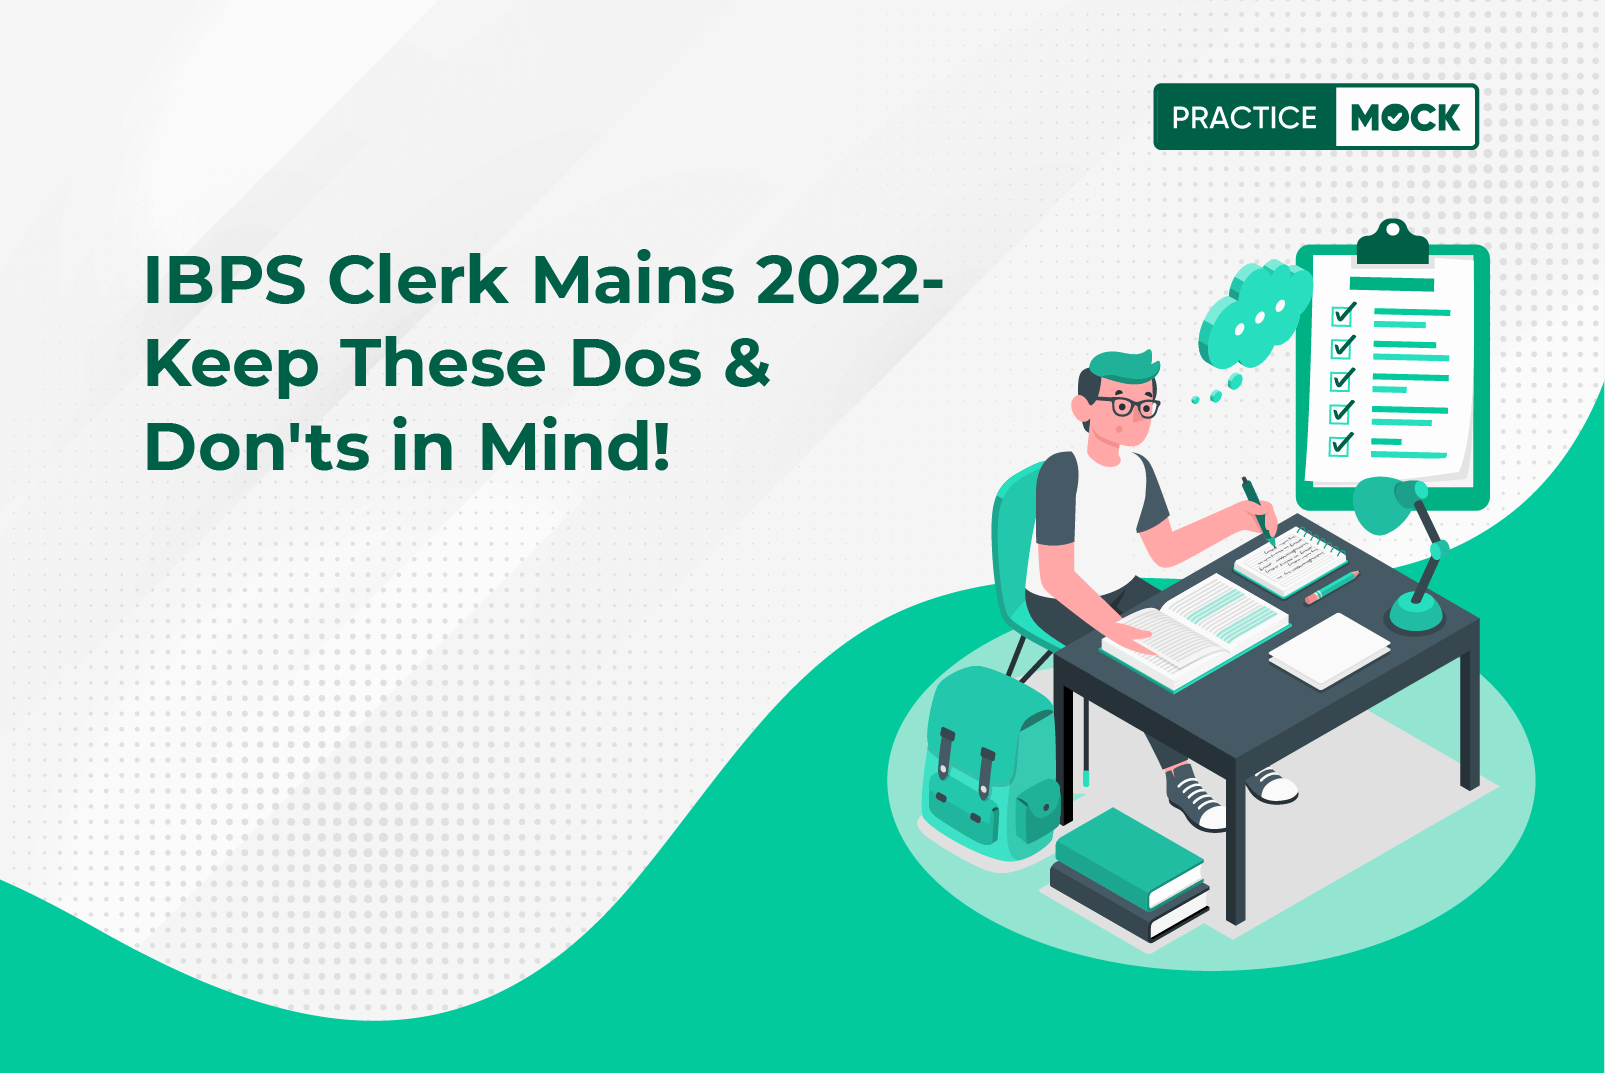 Do's and Don'ts for IBPS Clerk Mains Exam 2022